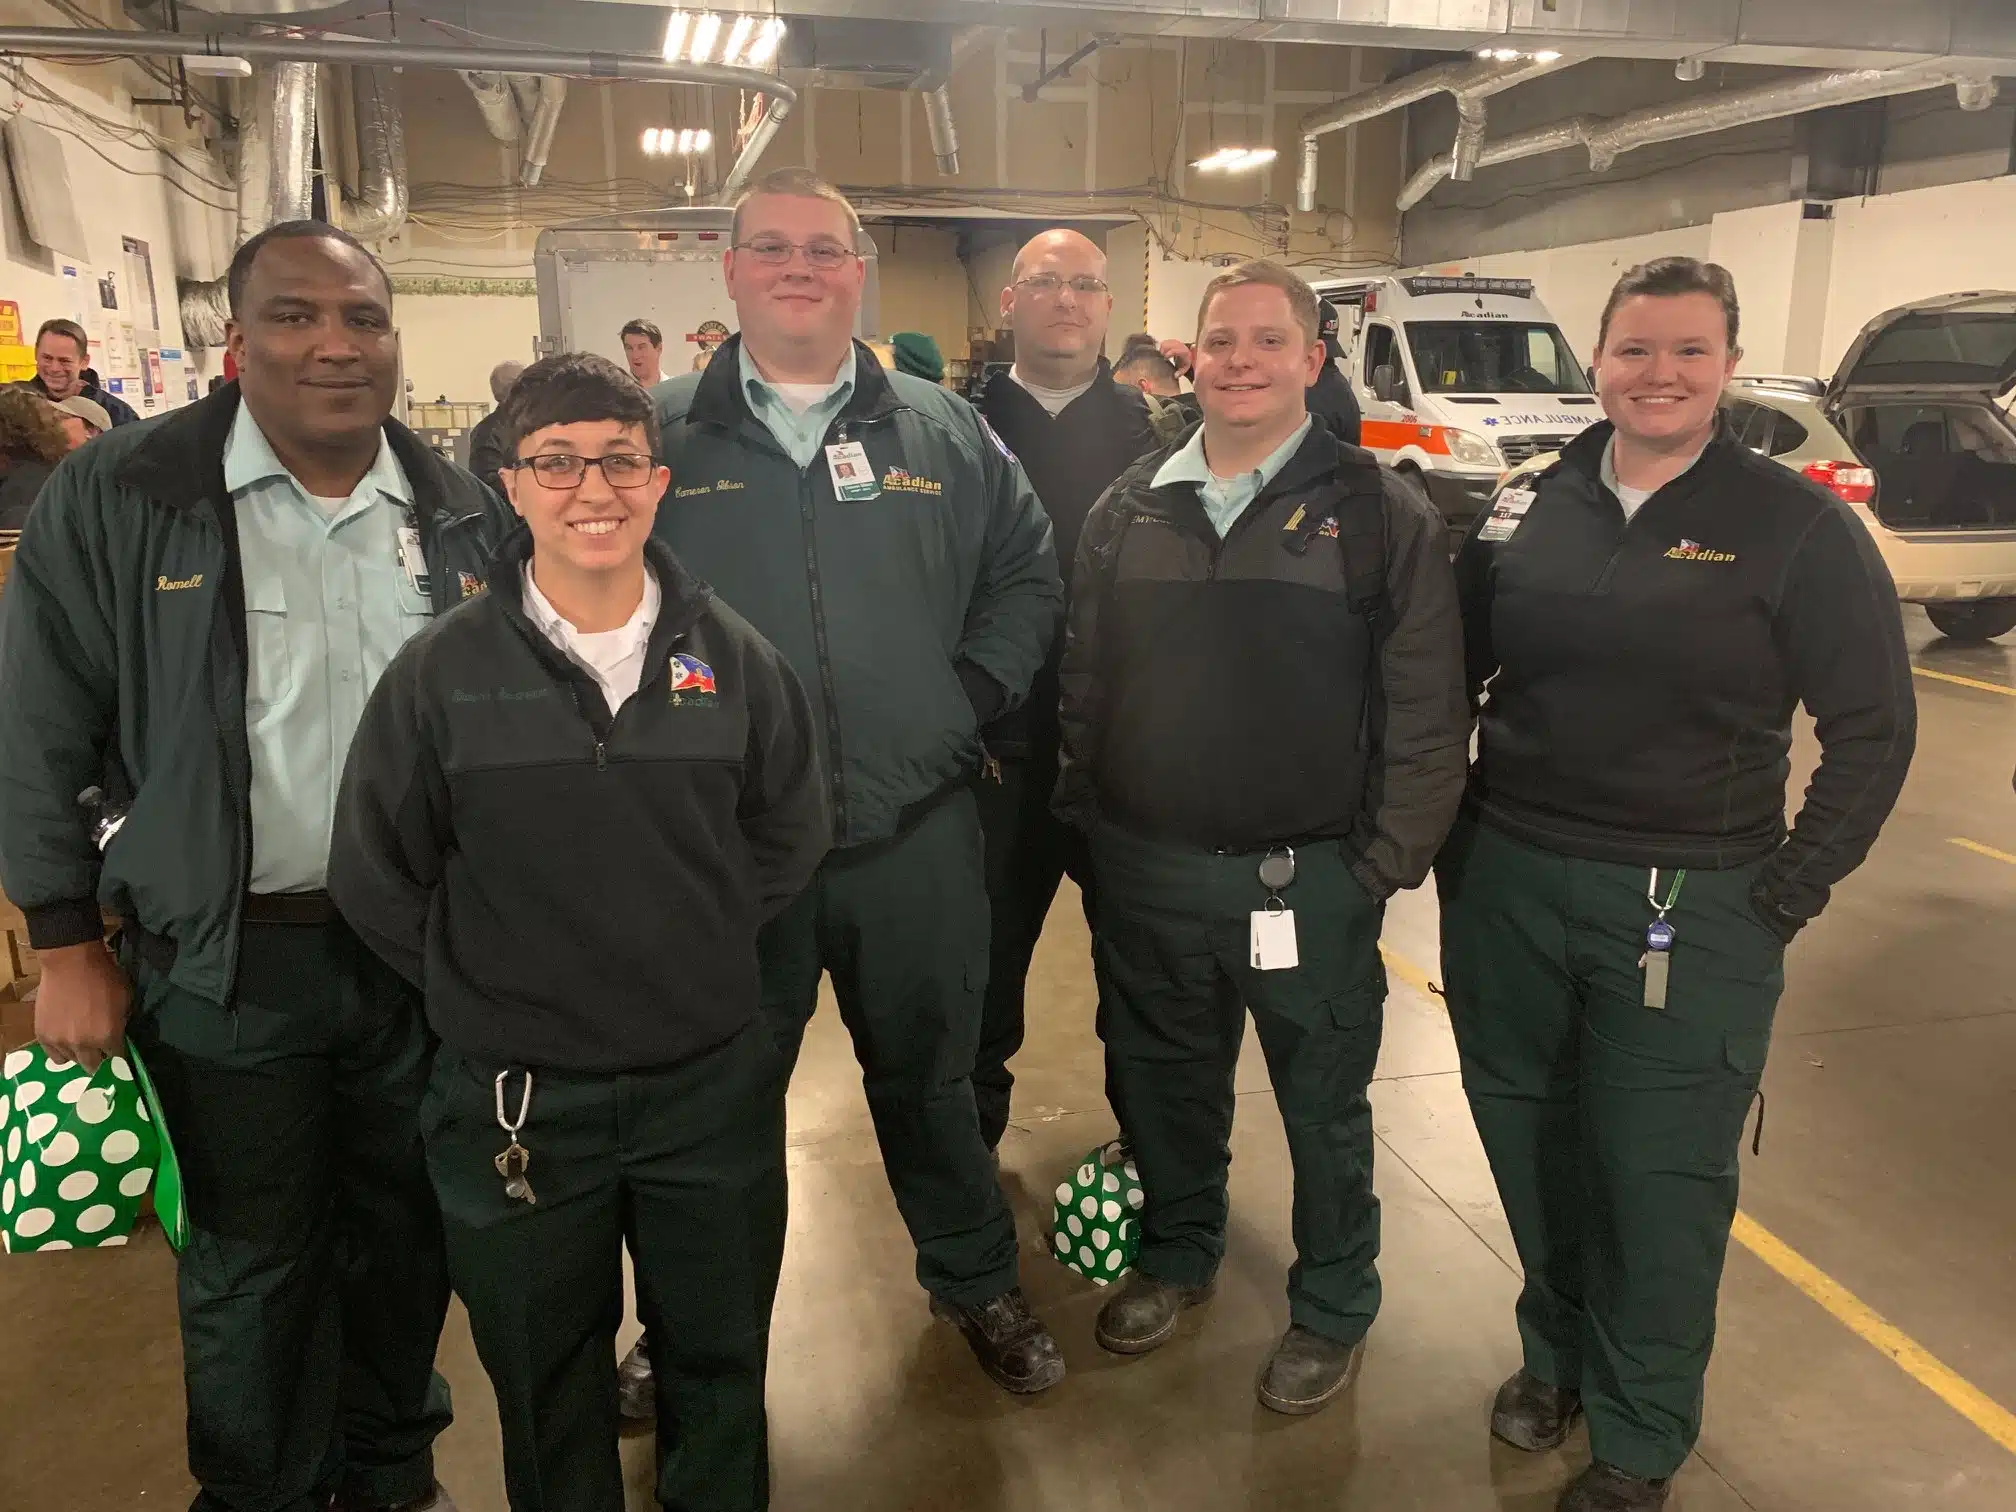 Acadian Ambulance team in Tennessee